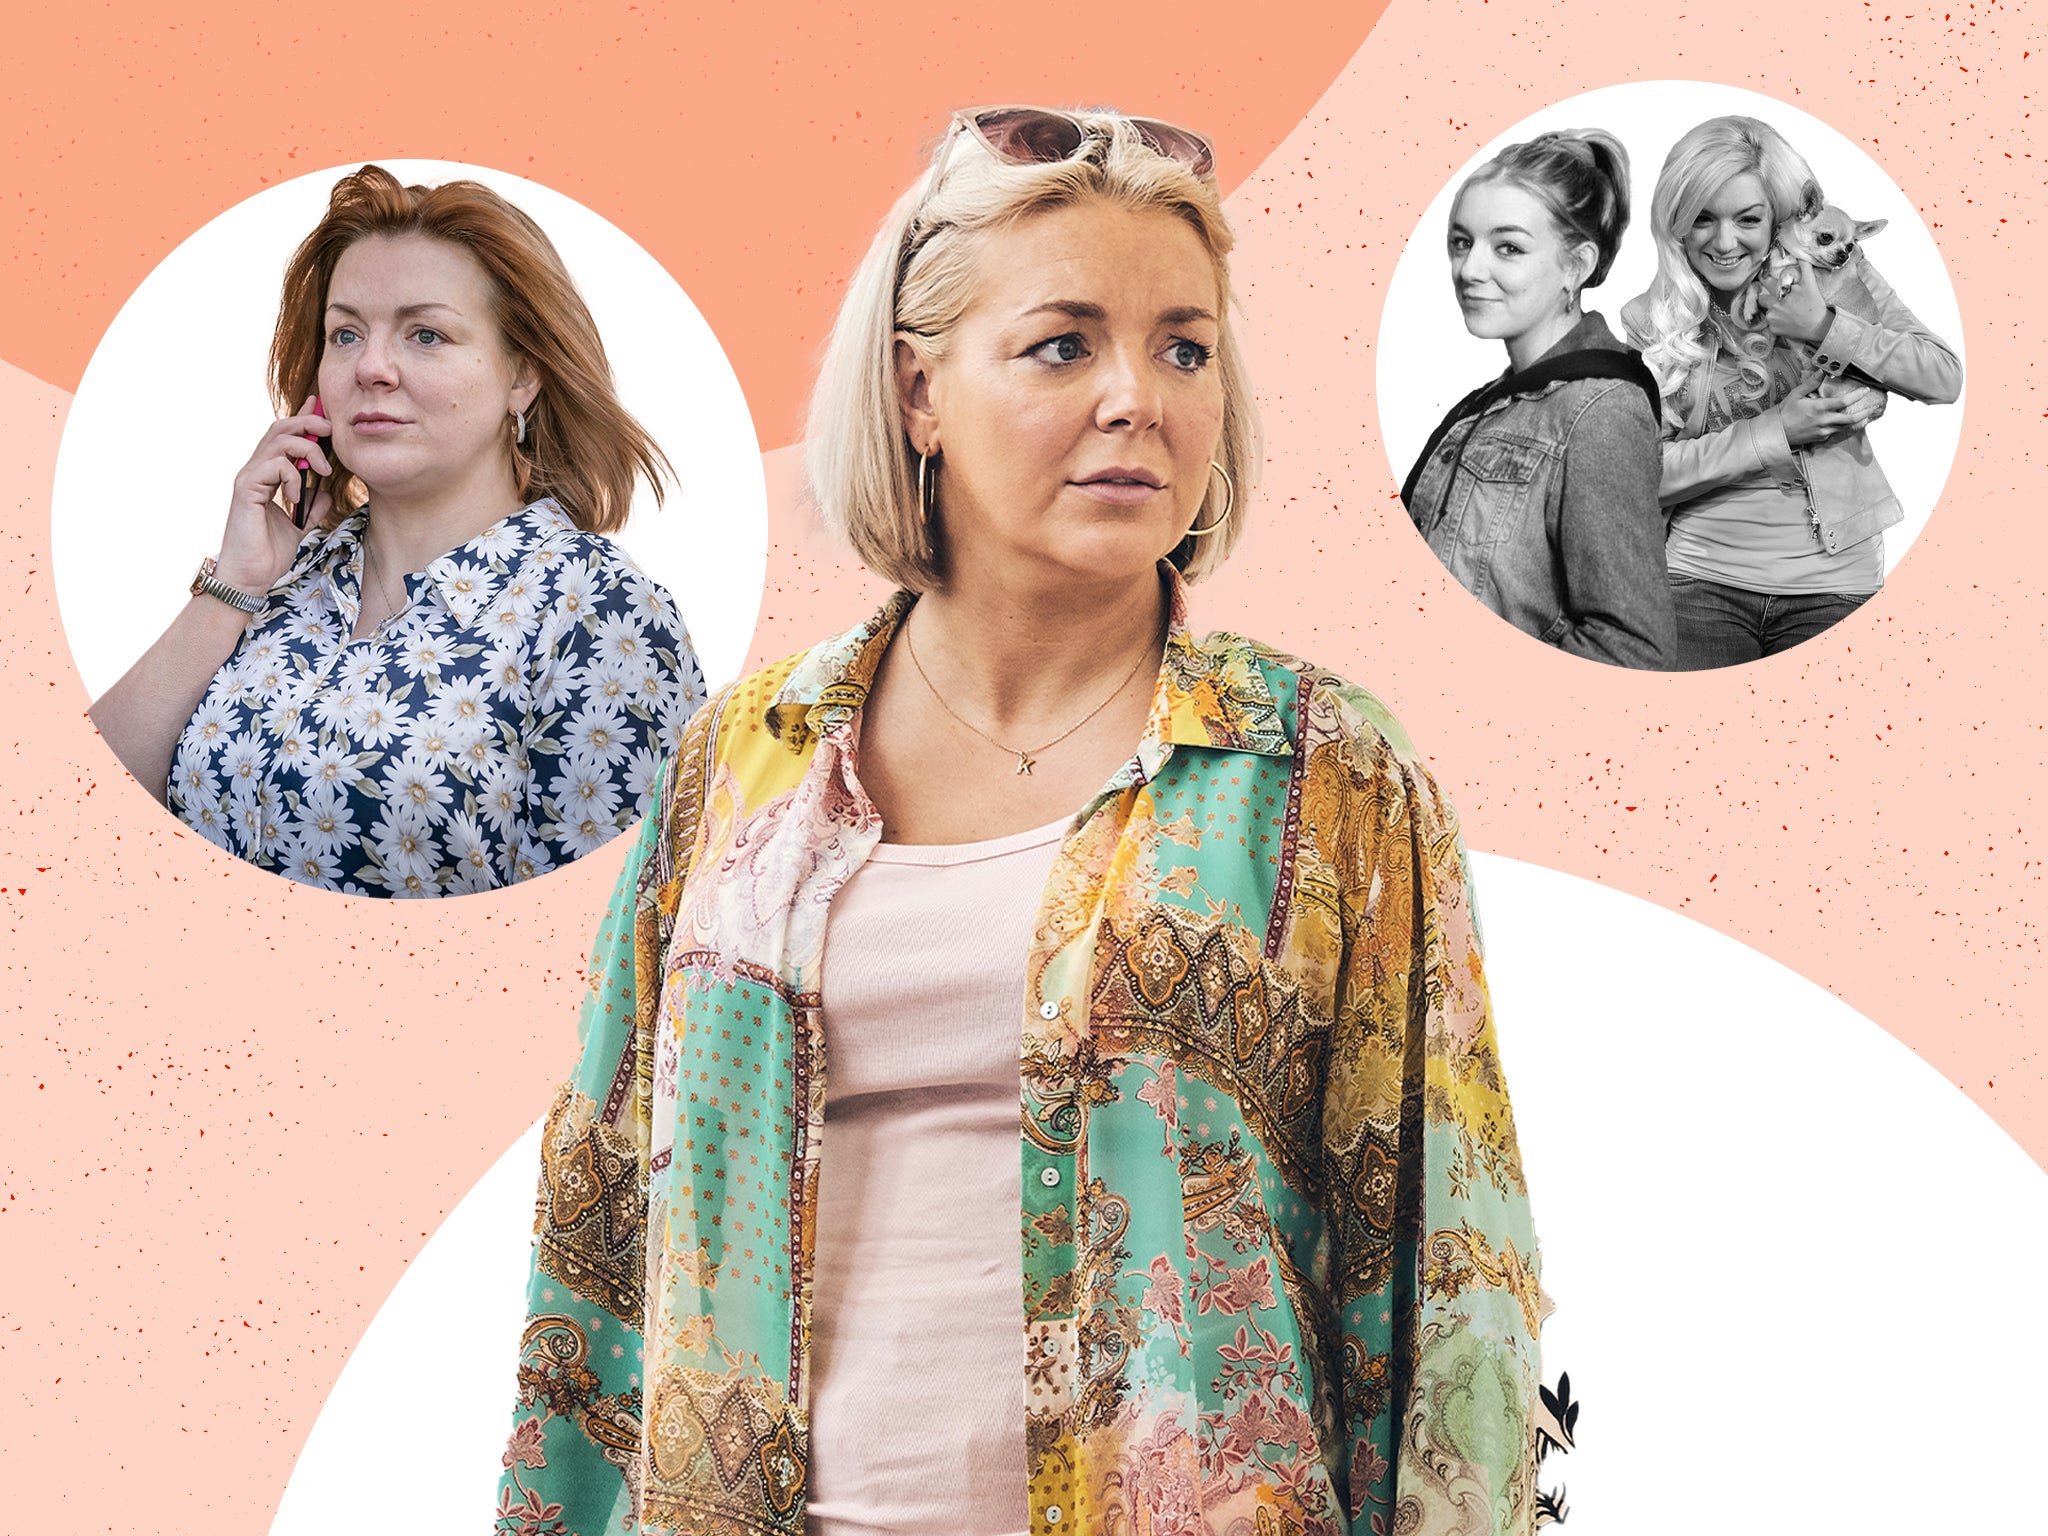 With roles in series like ‘The Teacher’ and ‘No Return’, Sheridan Smith is proving her extraordinary versatility as a performer